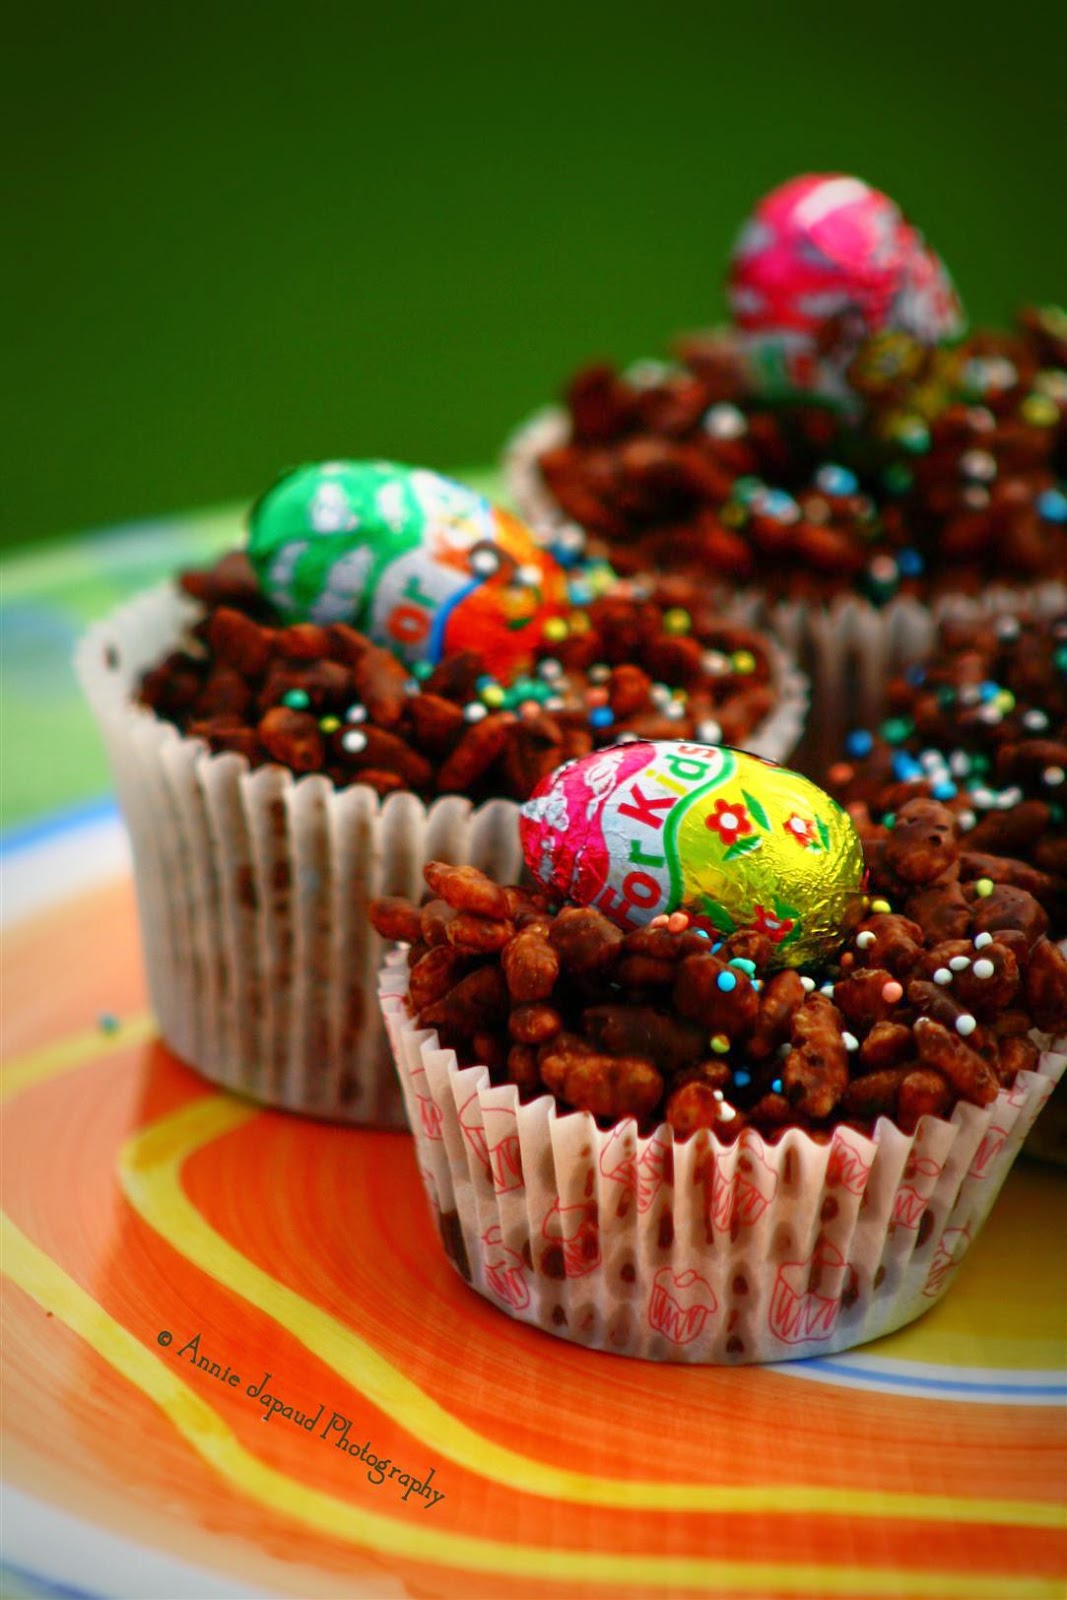 Annie The Baking Queen: Chocolate rice crispy cakes for Easter